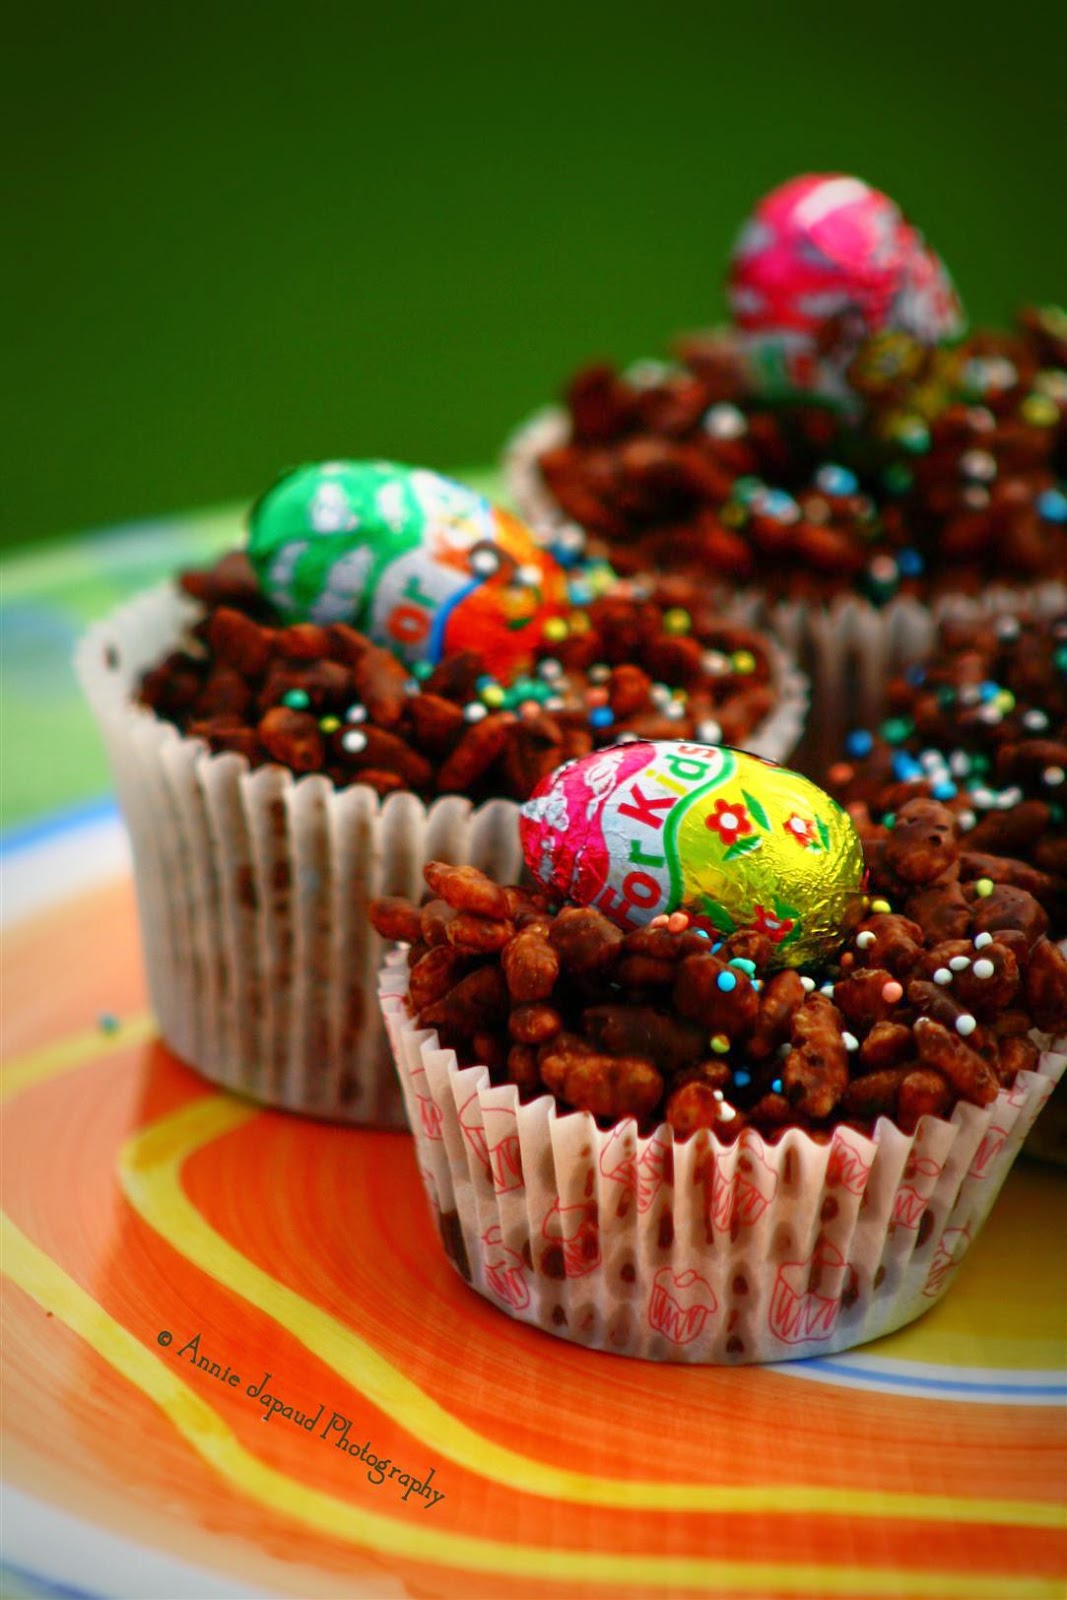 Annie The Baking Queen: Chocolate rice crispy cakes for Easter